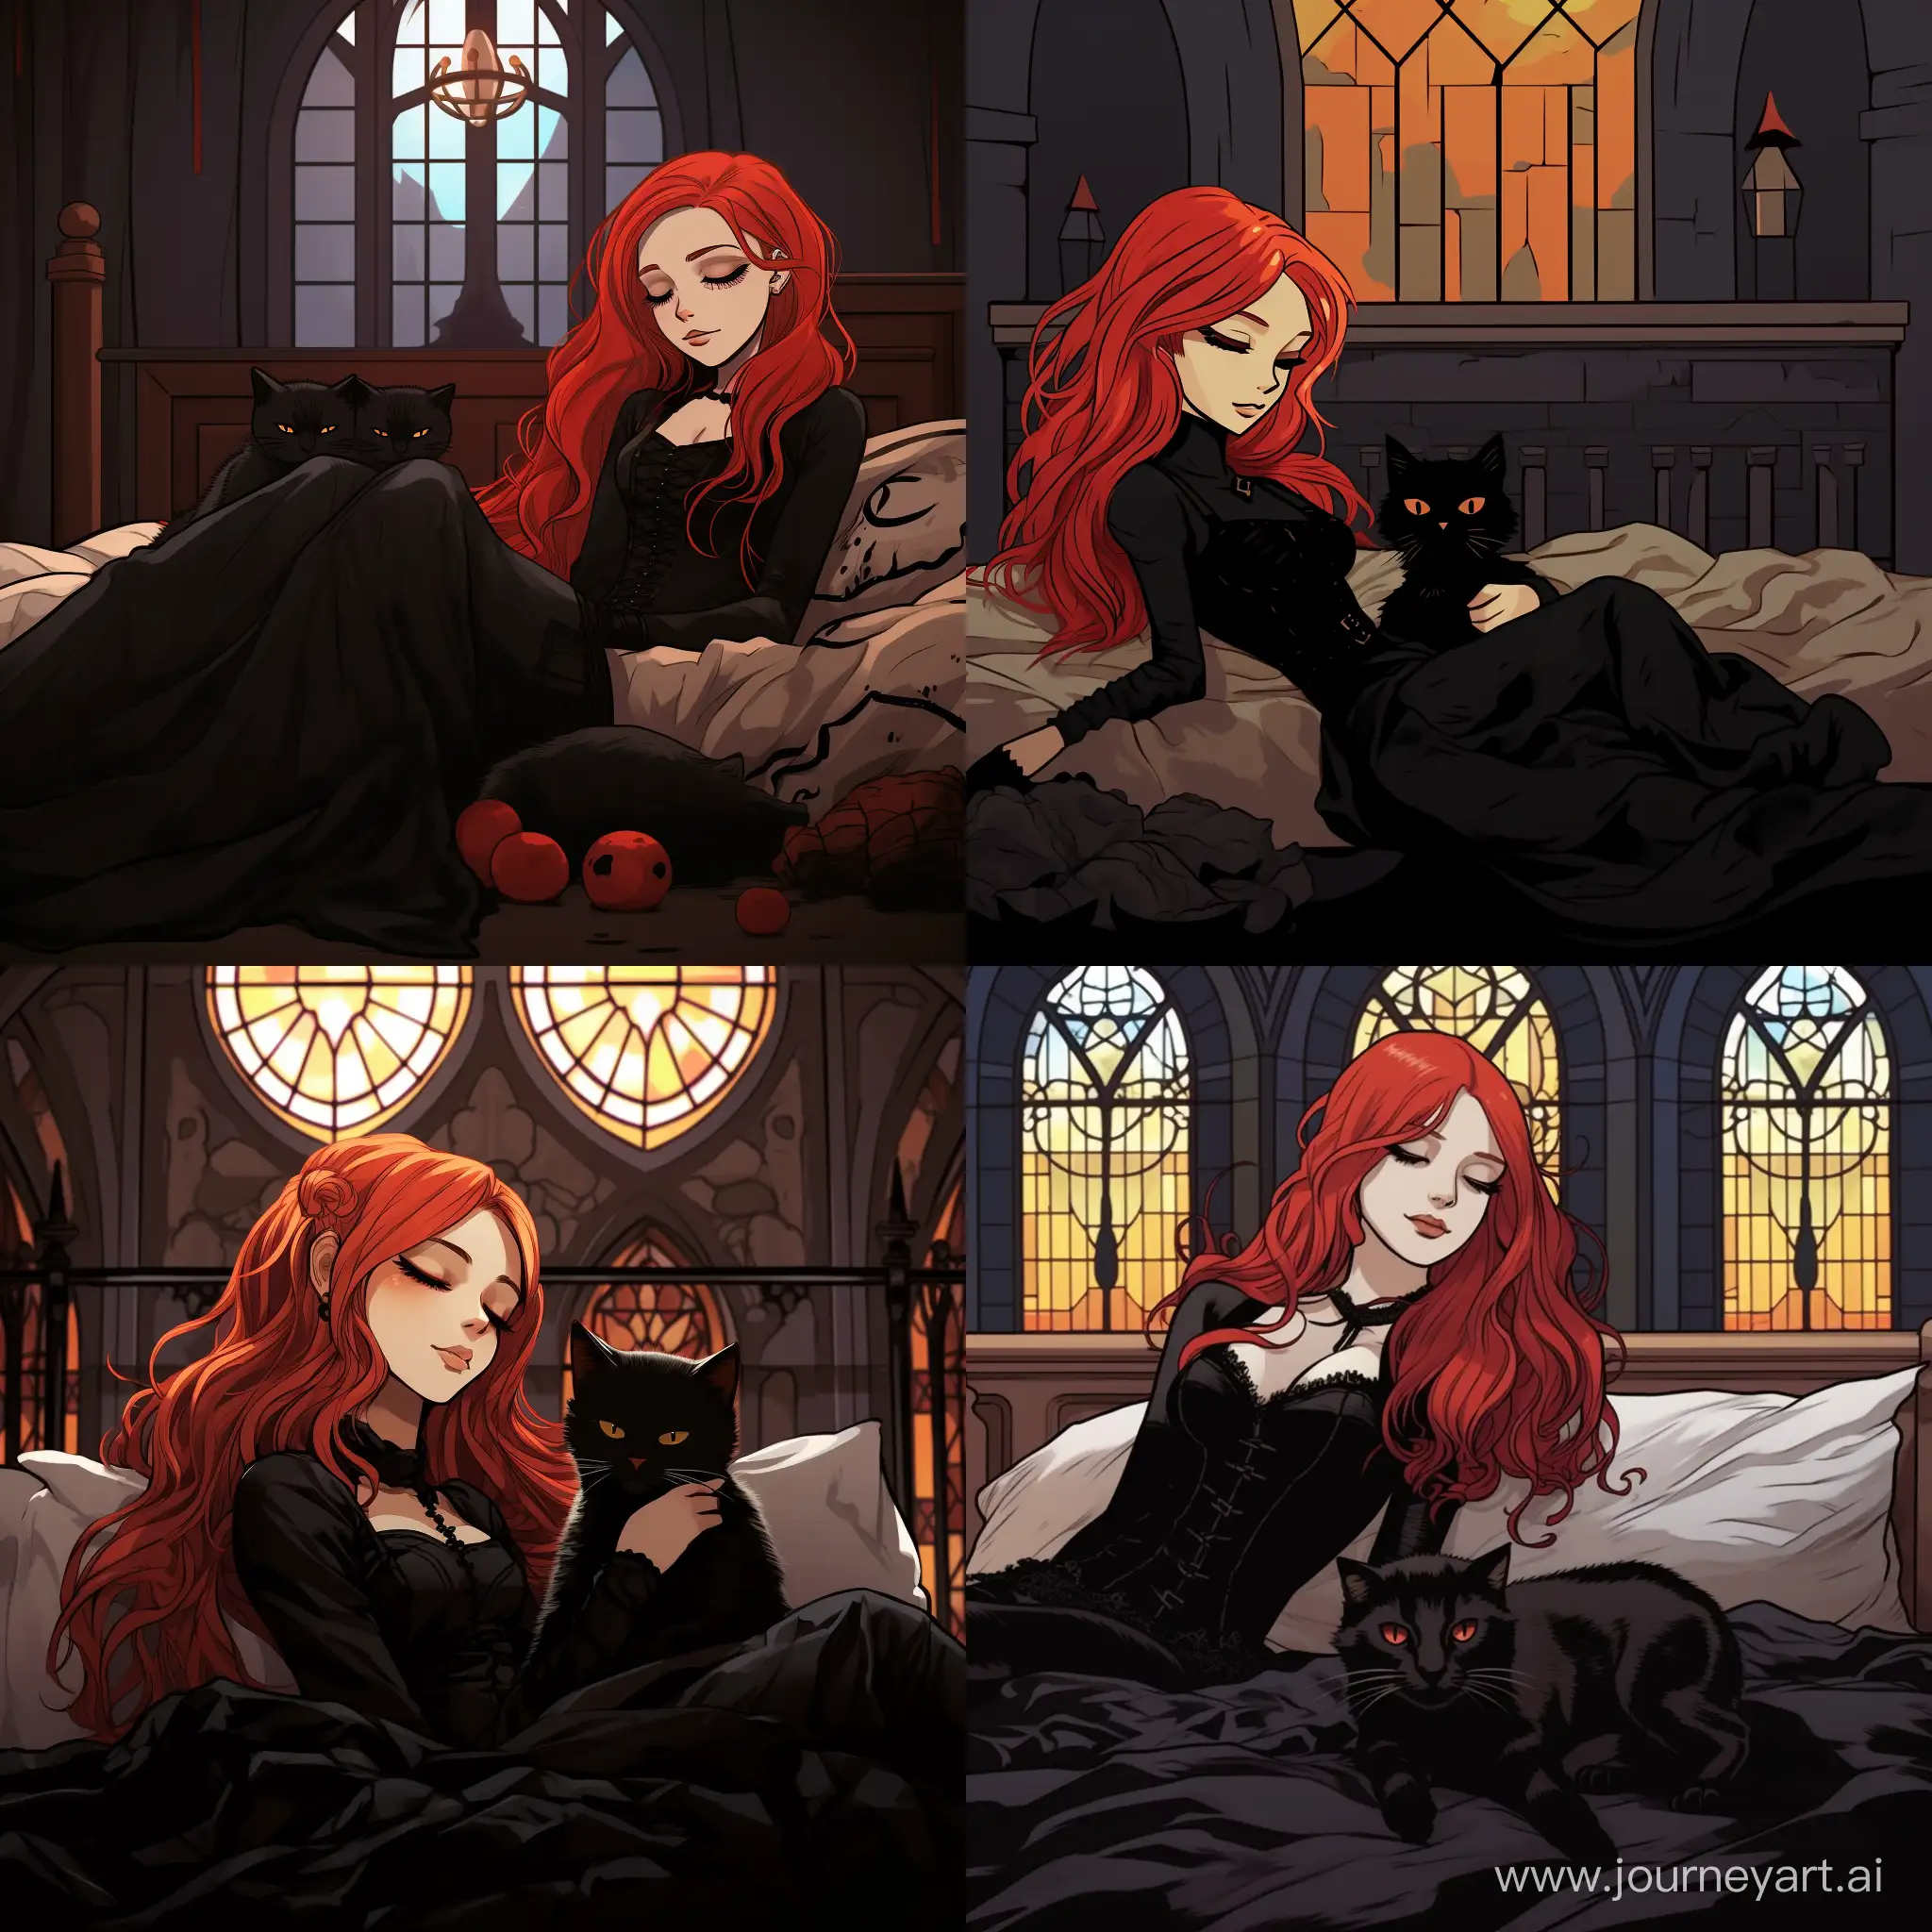 Enchanting-Slumber-RedHaired-Gothic-Girl-and-Cat-in-Dreamy-Reverie